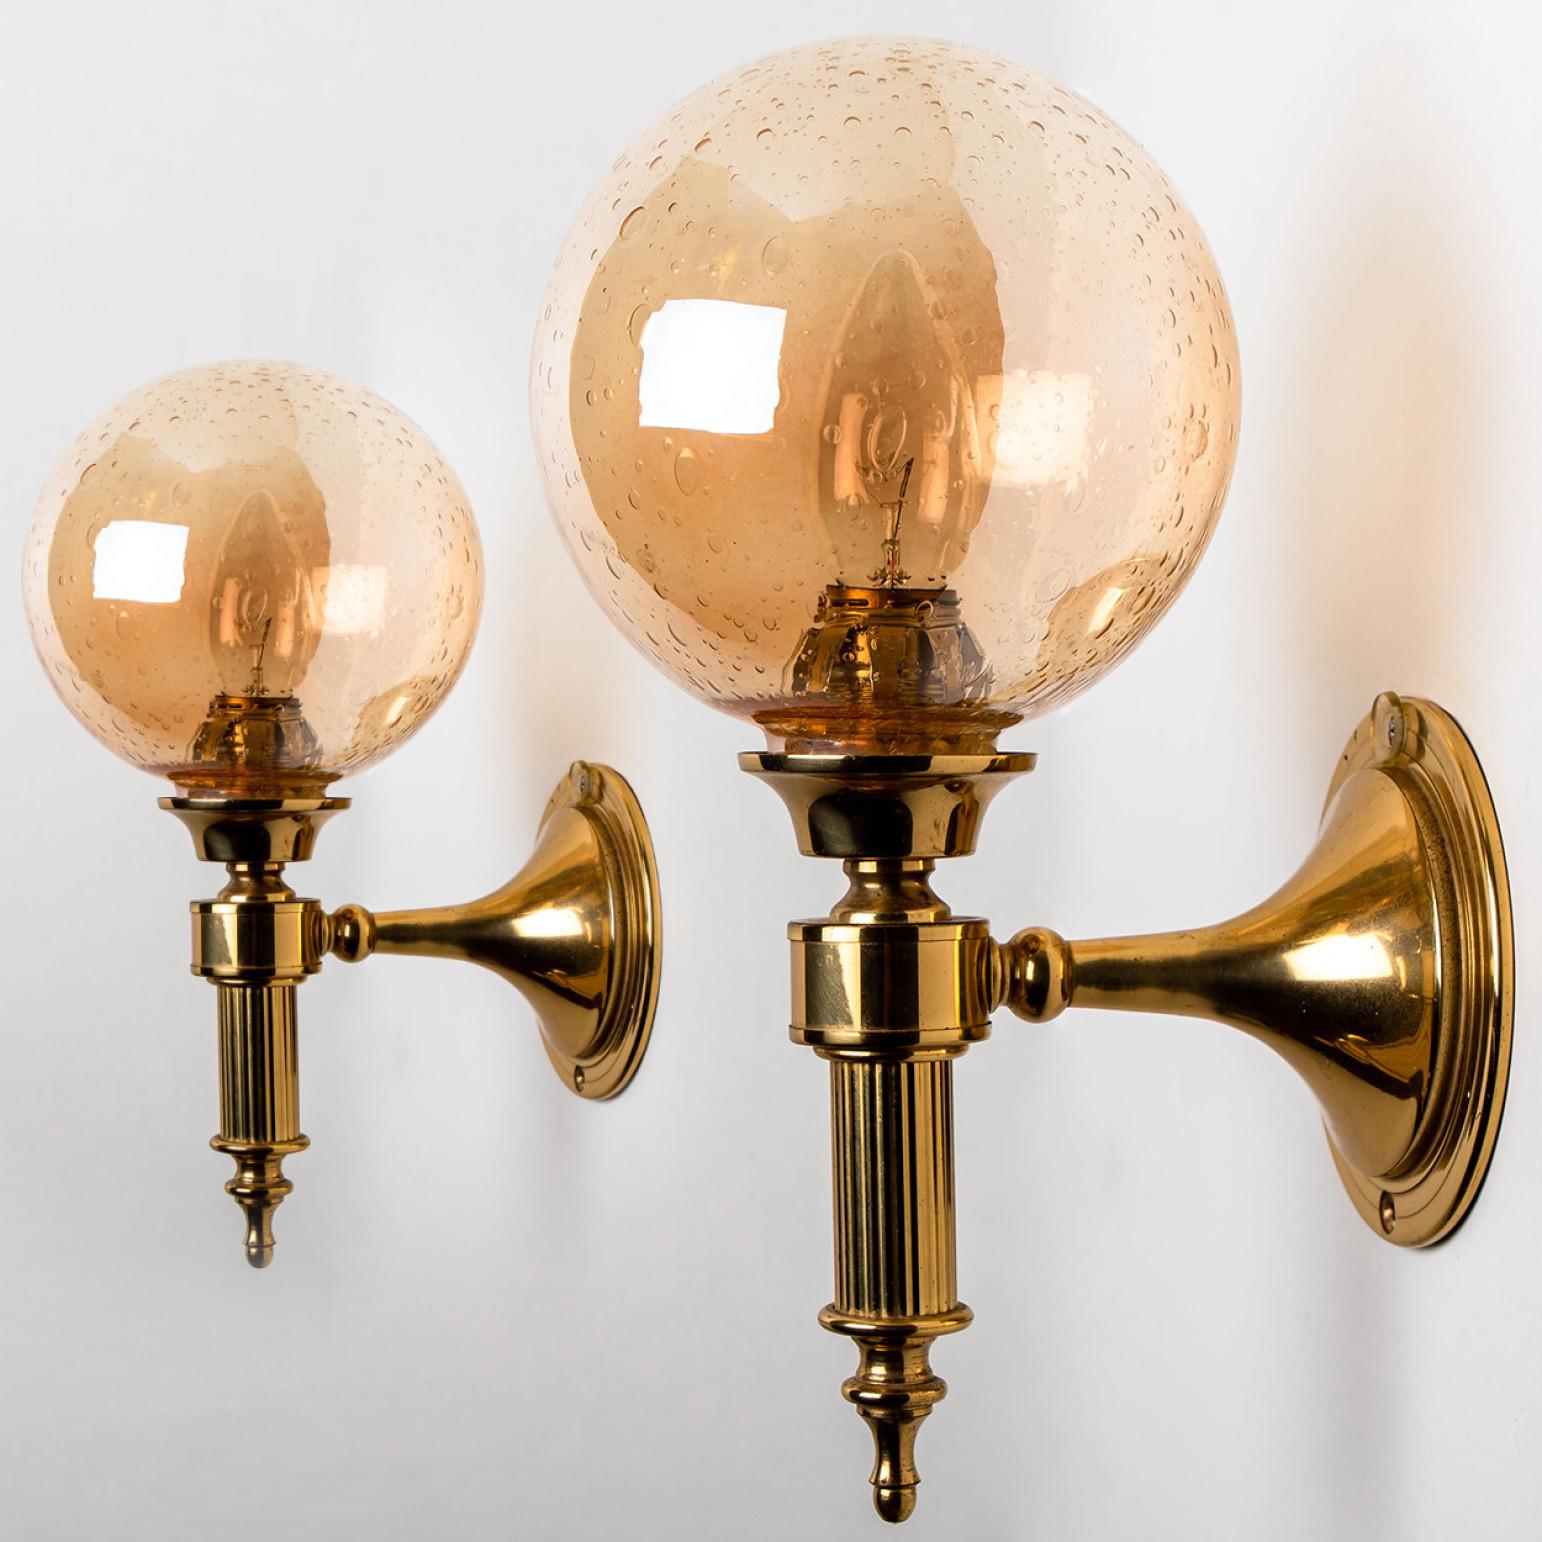 Mid-Century Modern Amber Glass and Brass Wall Lamps in the Style of Glashütte Limburg, 1975 For Sale